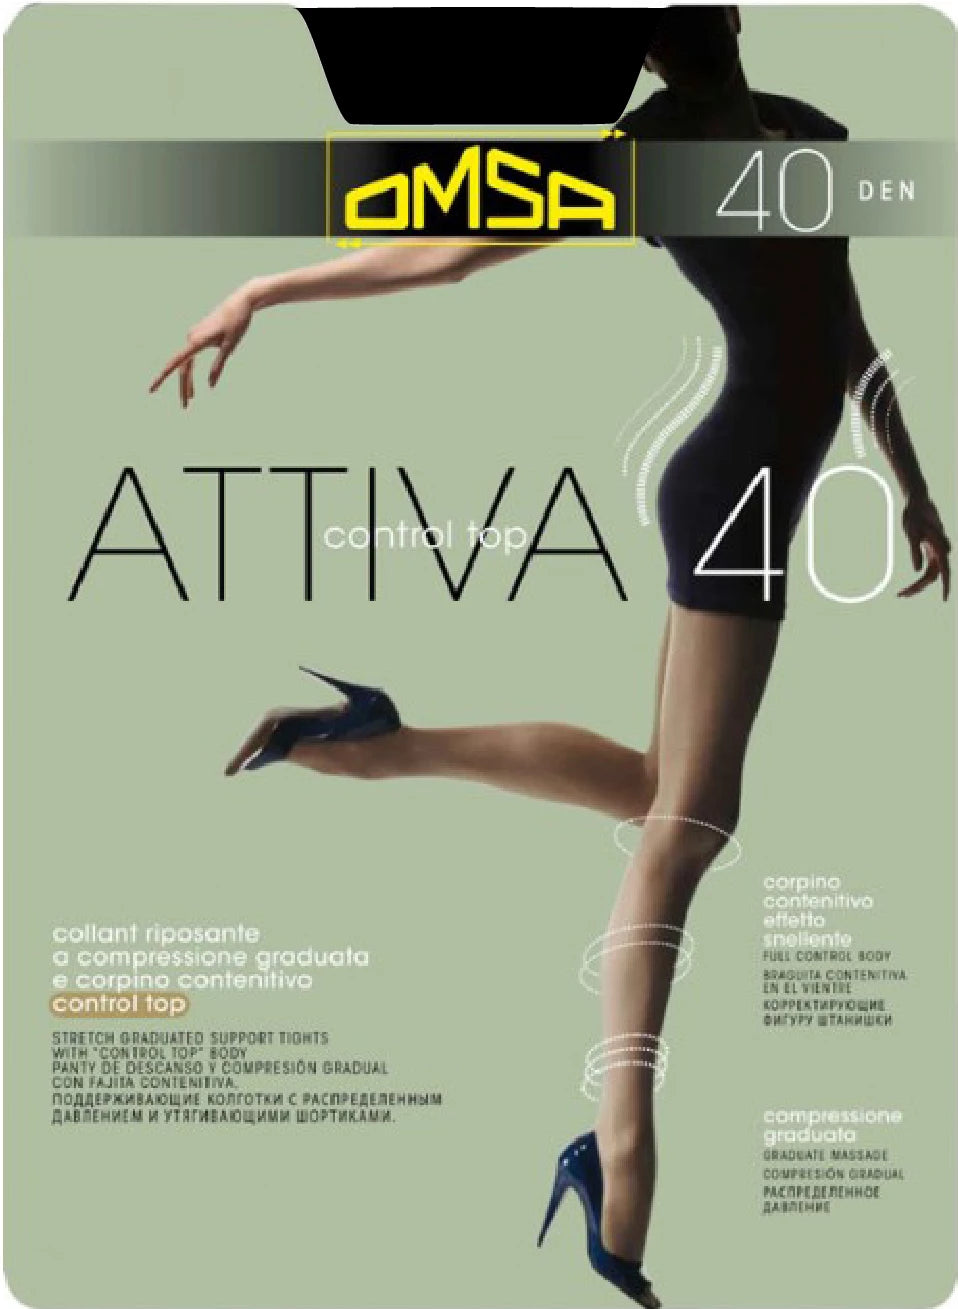 Omsa Attiva 40 Control-Top light support tights, gradual compression, helps conceal cellulite, good for flights and being on your feet all day.